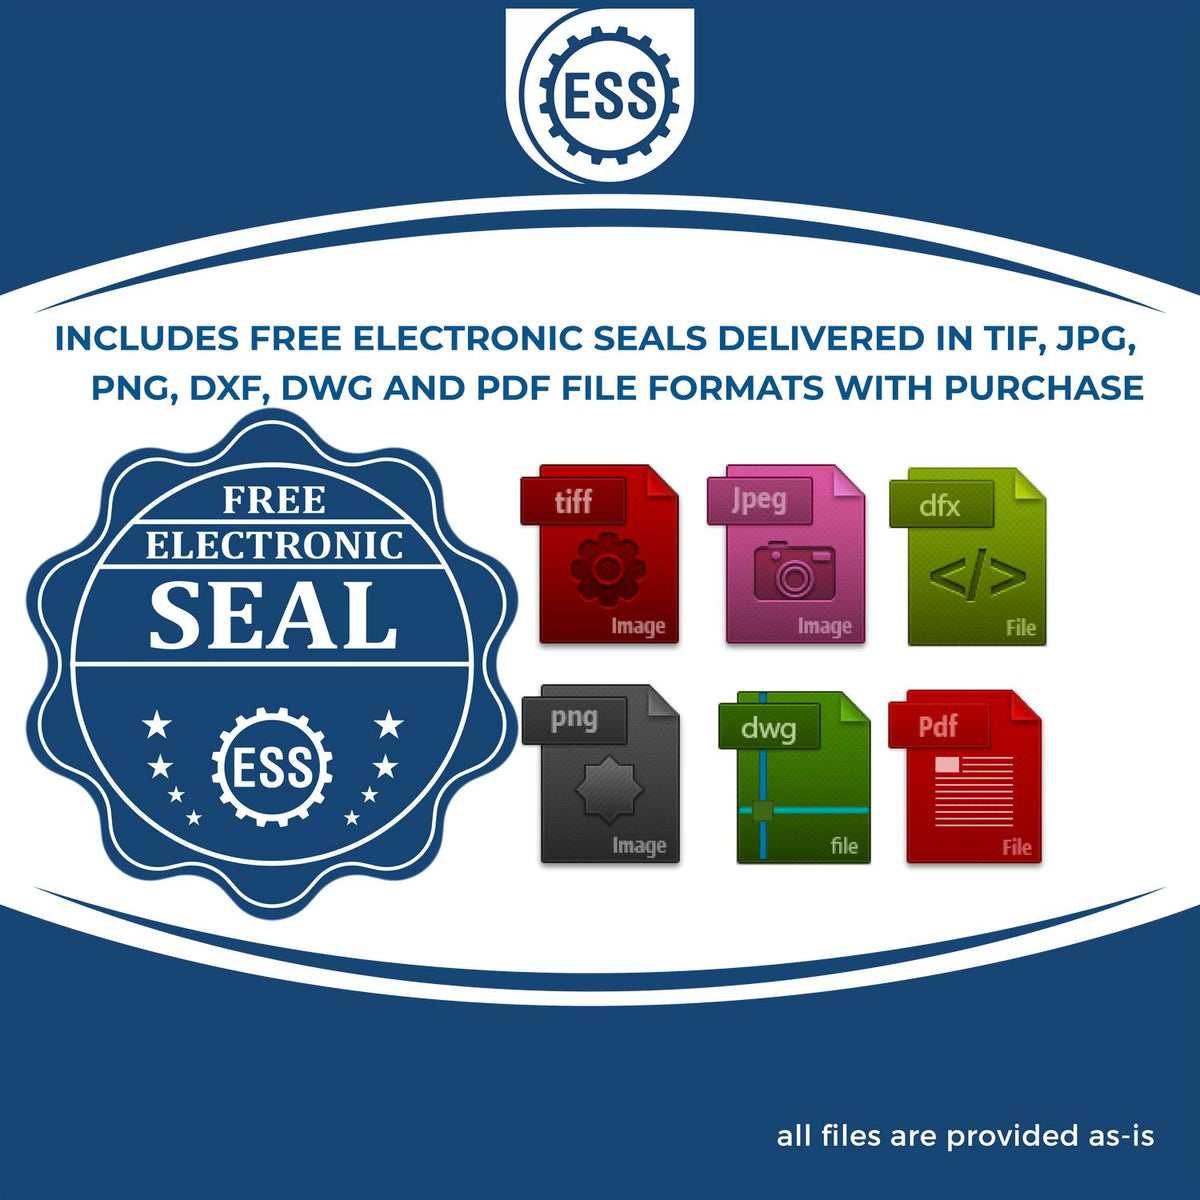 An infographic for the free electronic seal for the Hybrid Iowa Engineer Seal illustrating the different file type icons such as DXF, DWG, TIF, JPG and PNG.